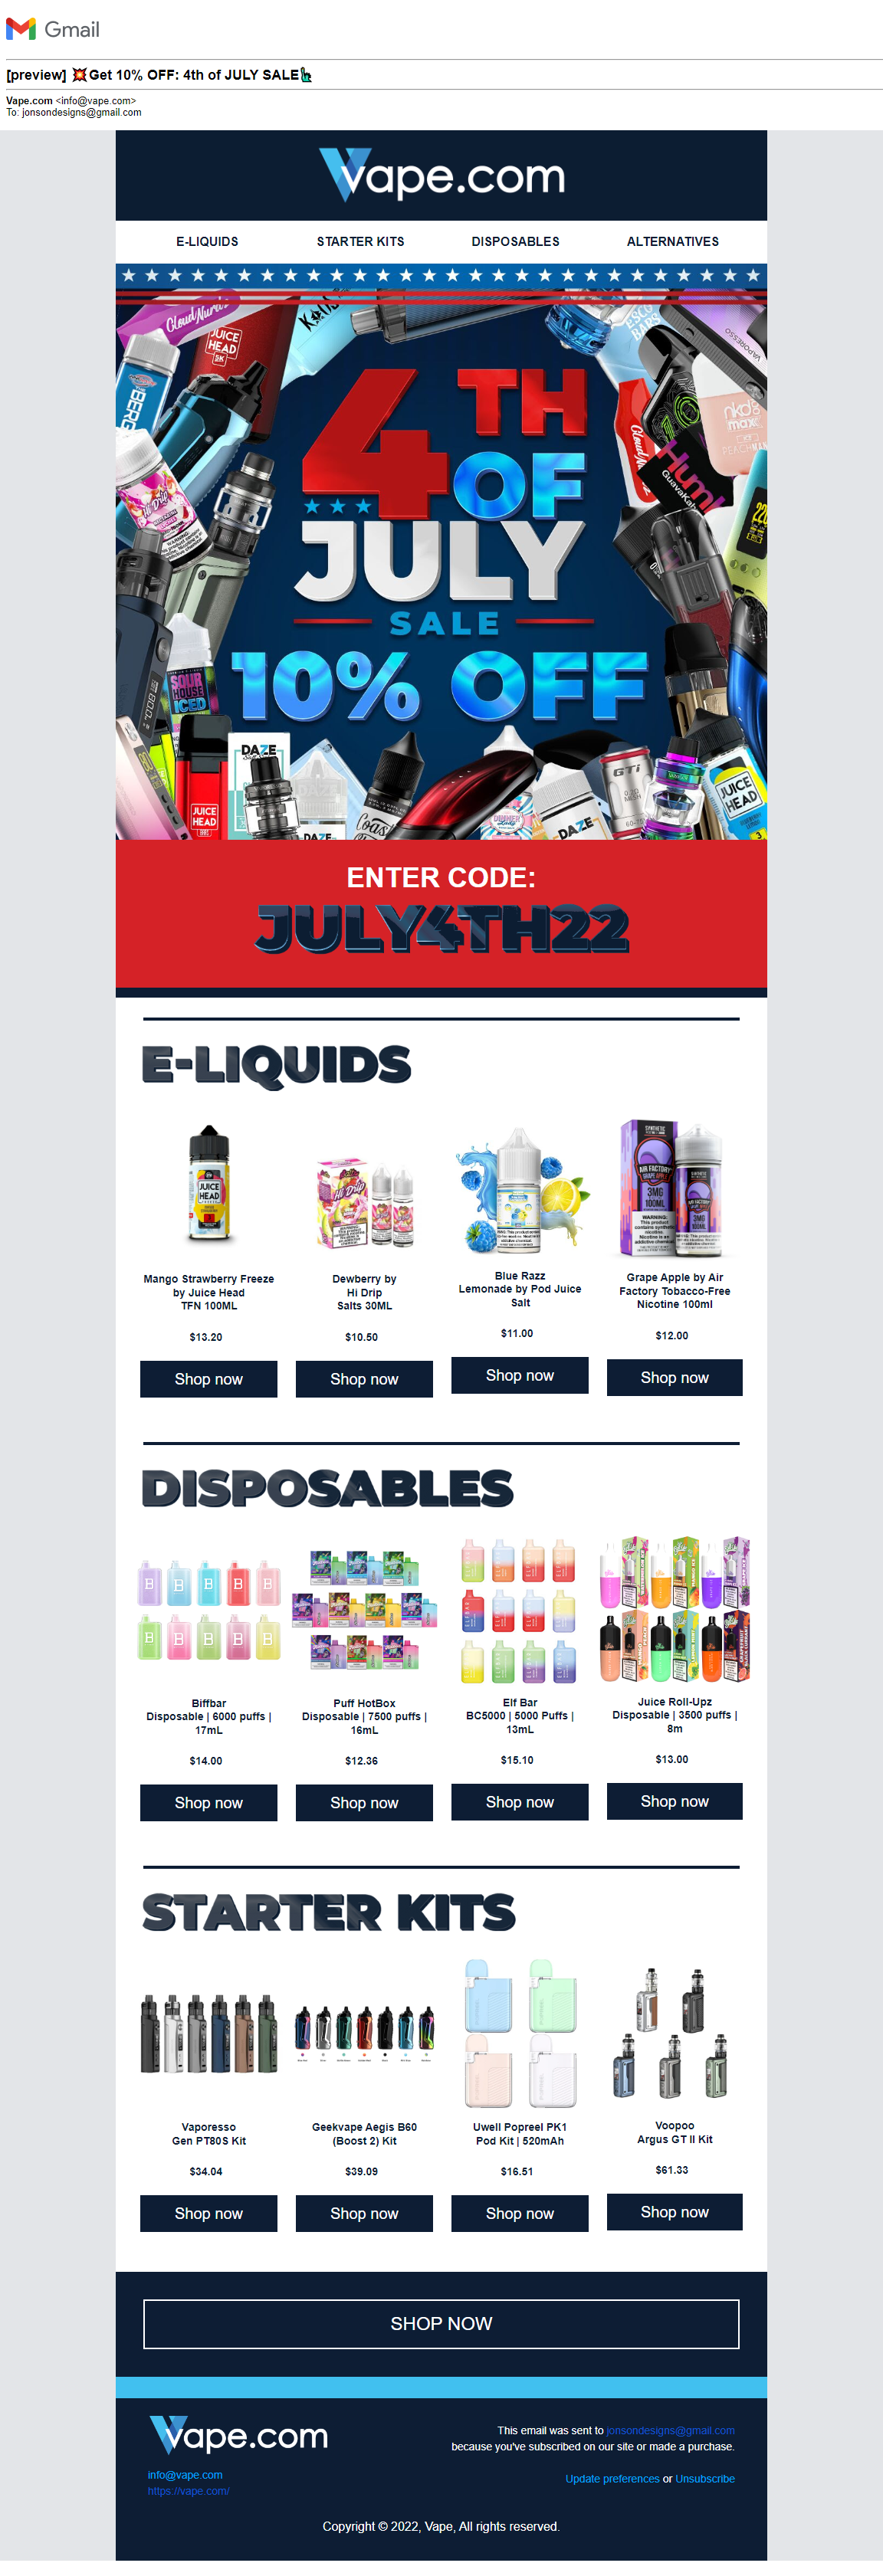 Email Campaign - 4th of July Sale